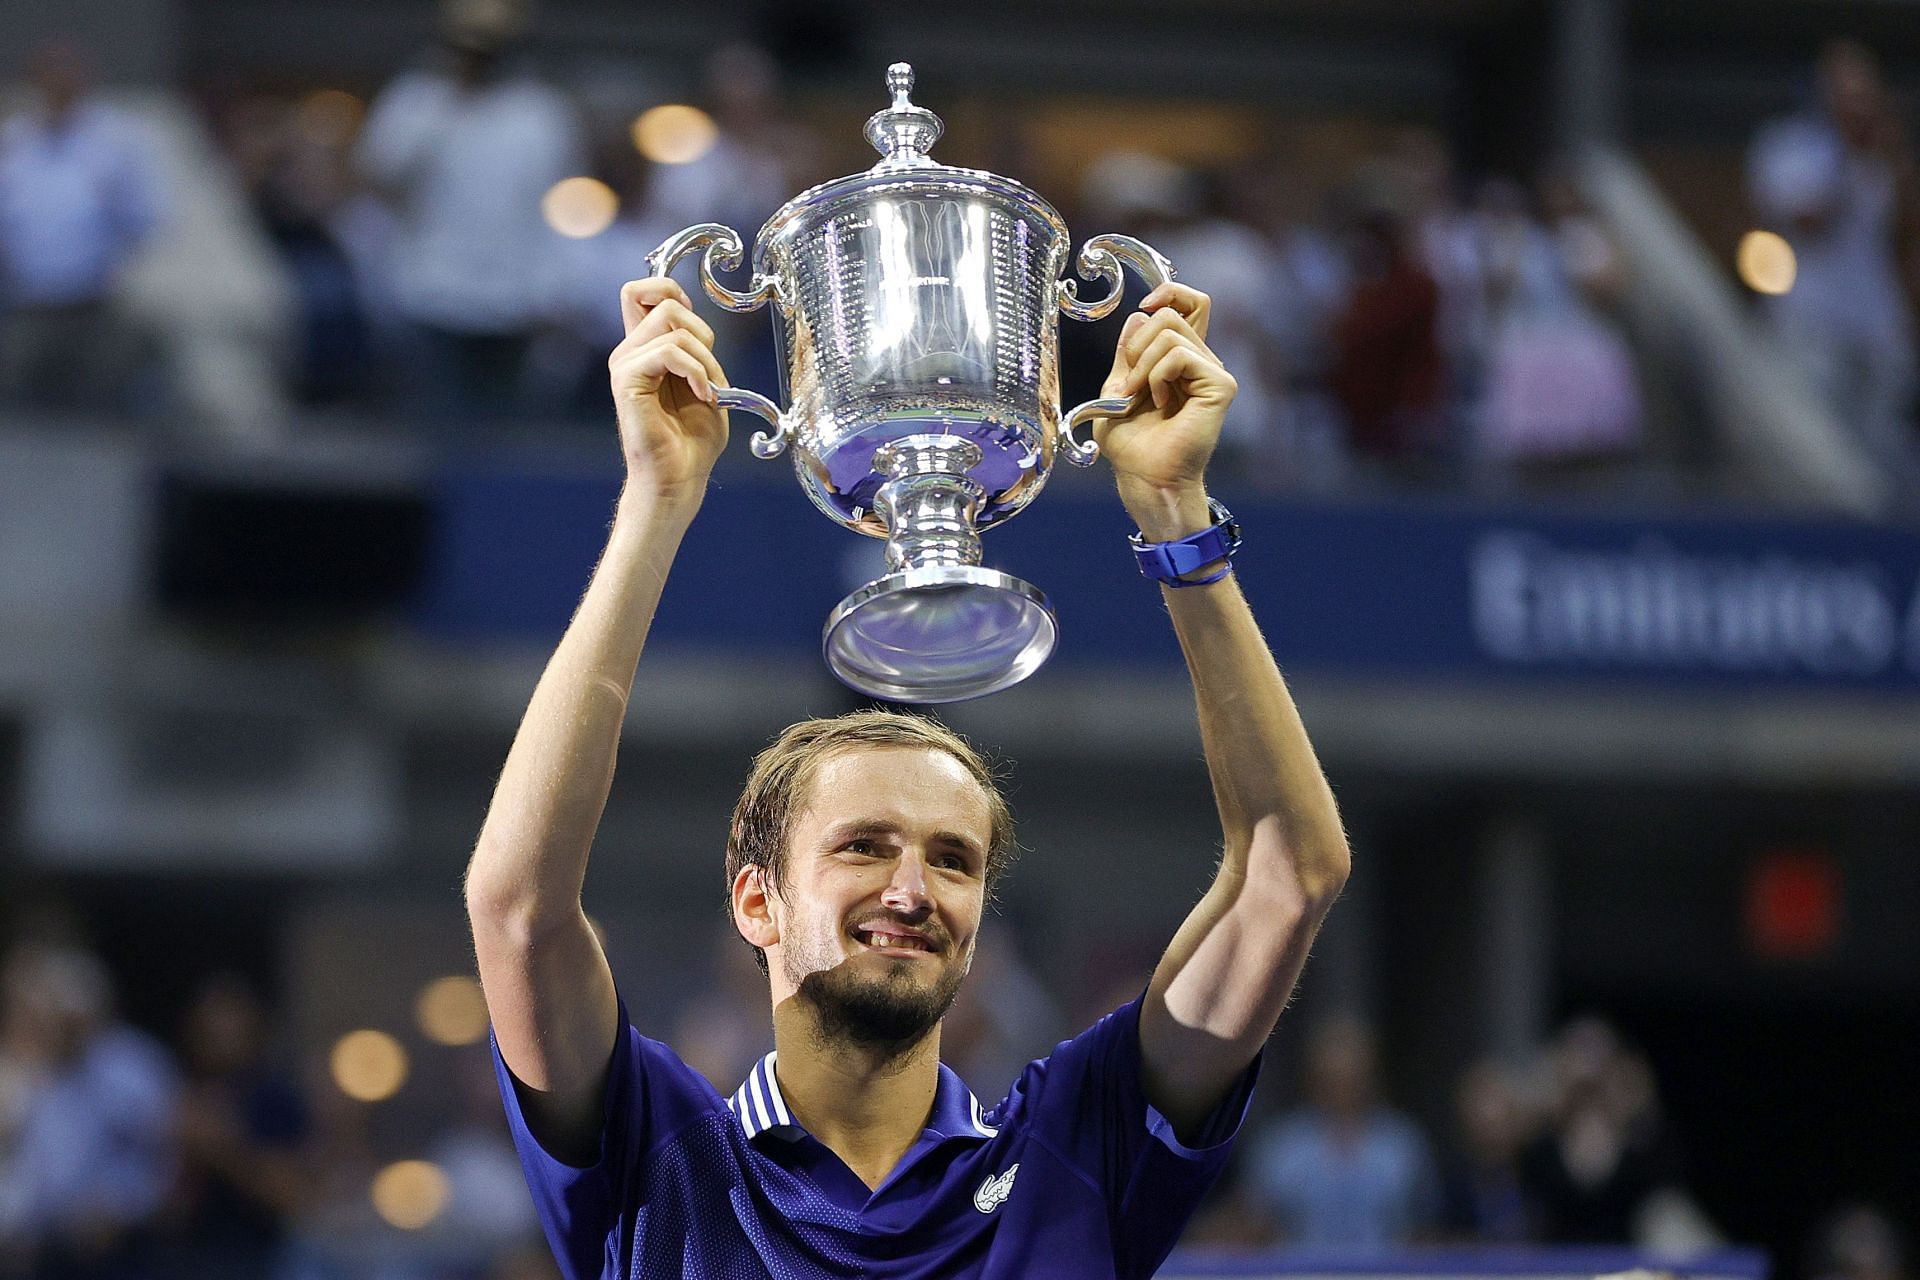 Medvedev with the 2021 US Open trophy.